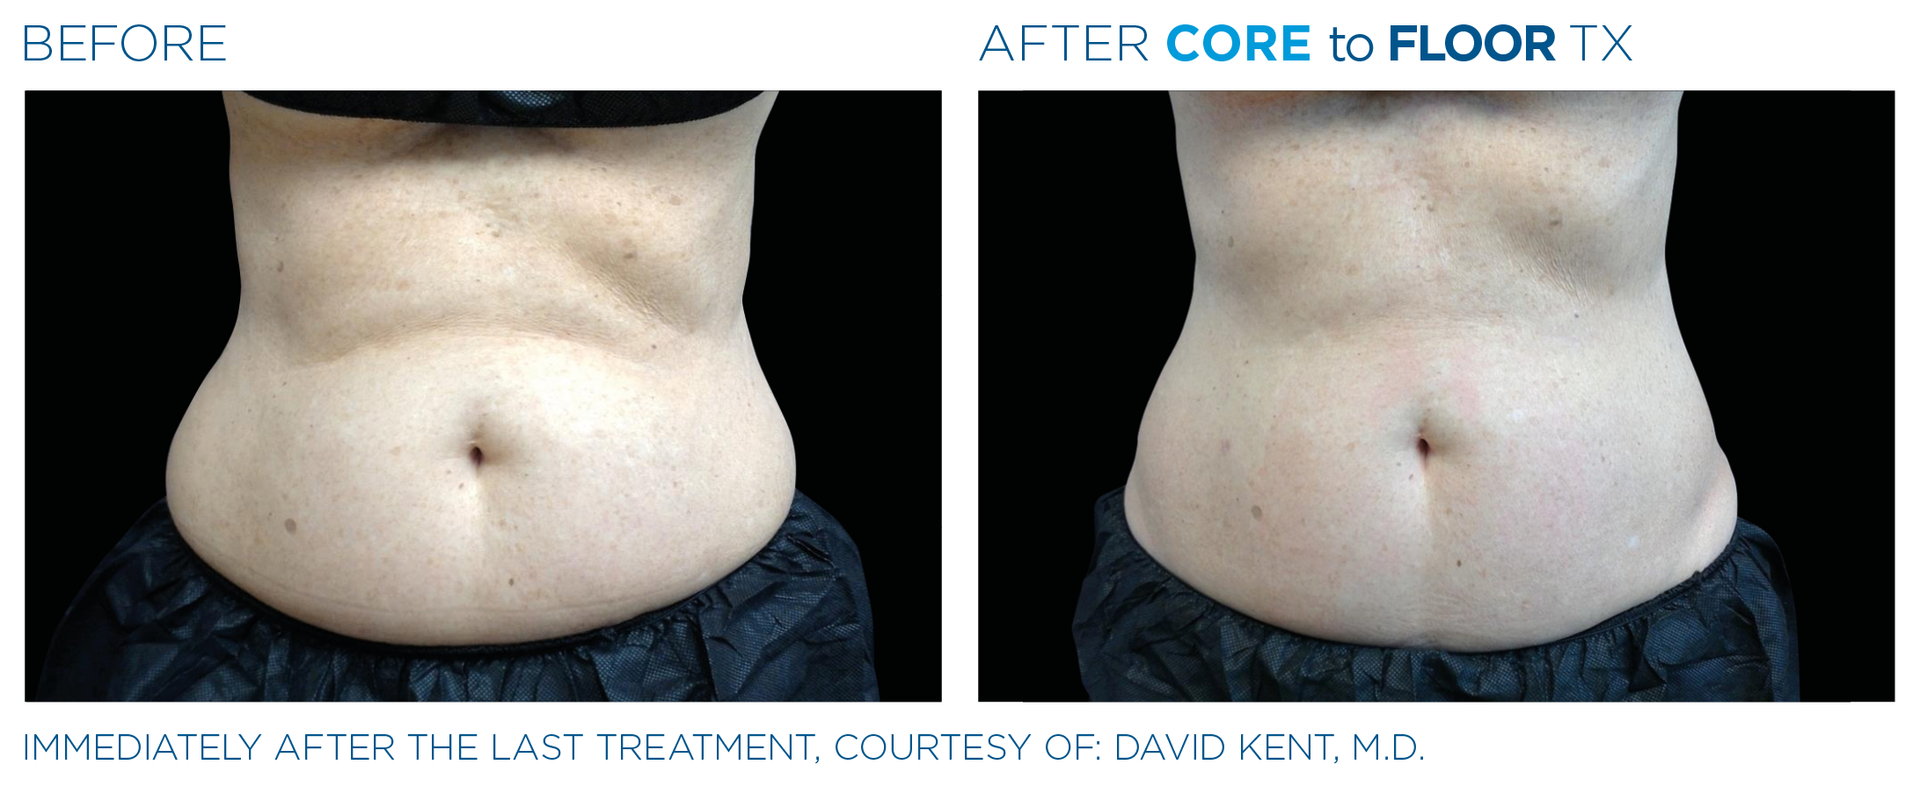 Results with Emsculpt neo at Dr. Mantor's Wrinkle and Weight Solutions in Westerville, OH book your free trial today!